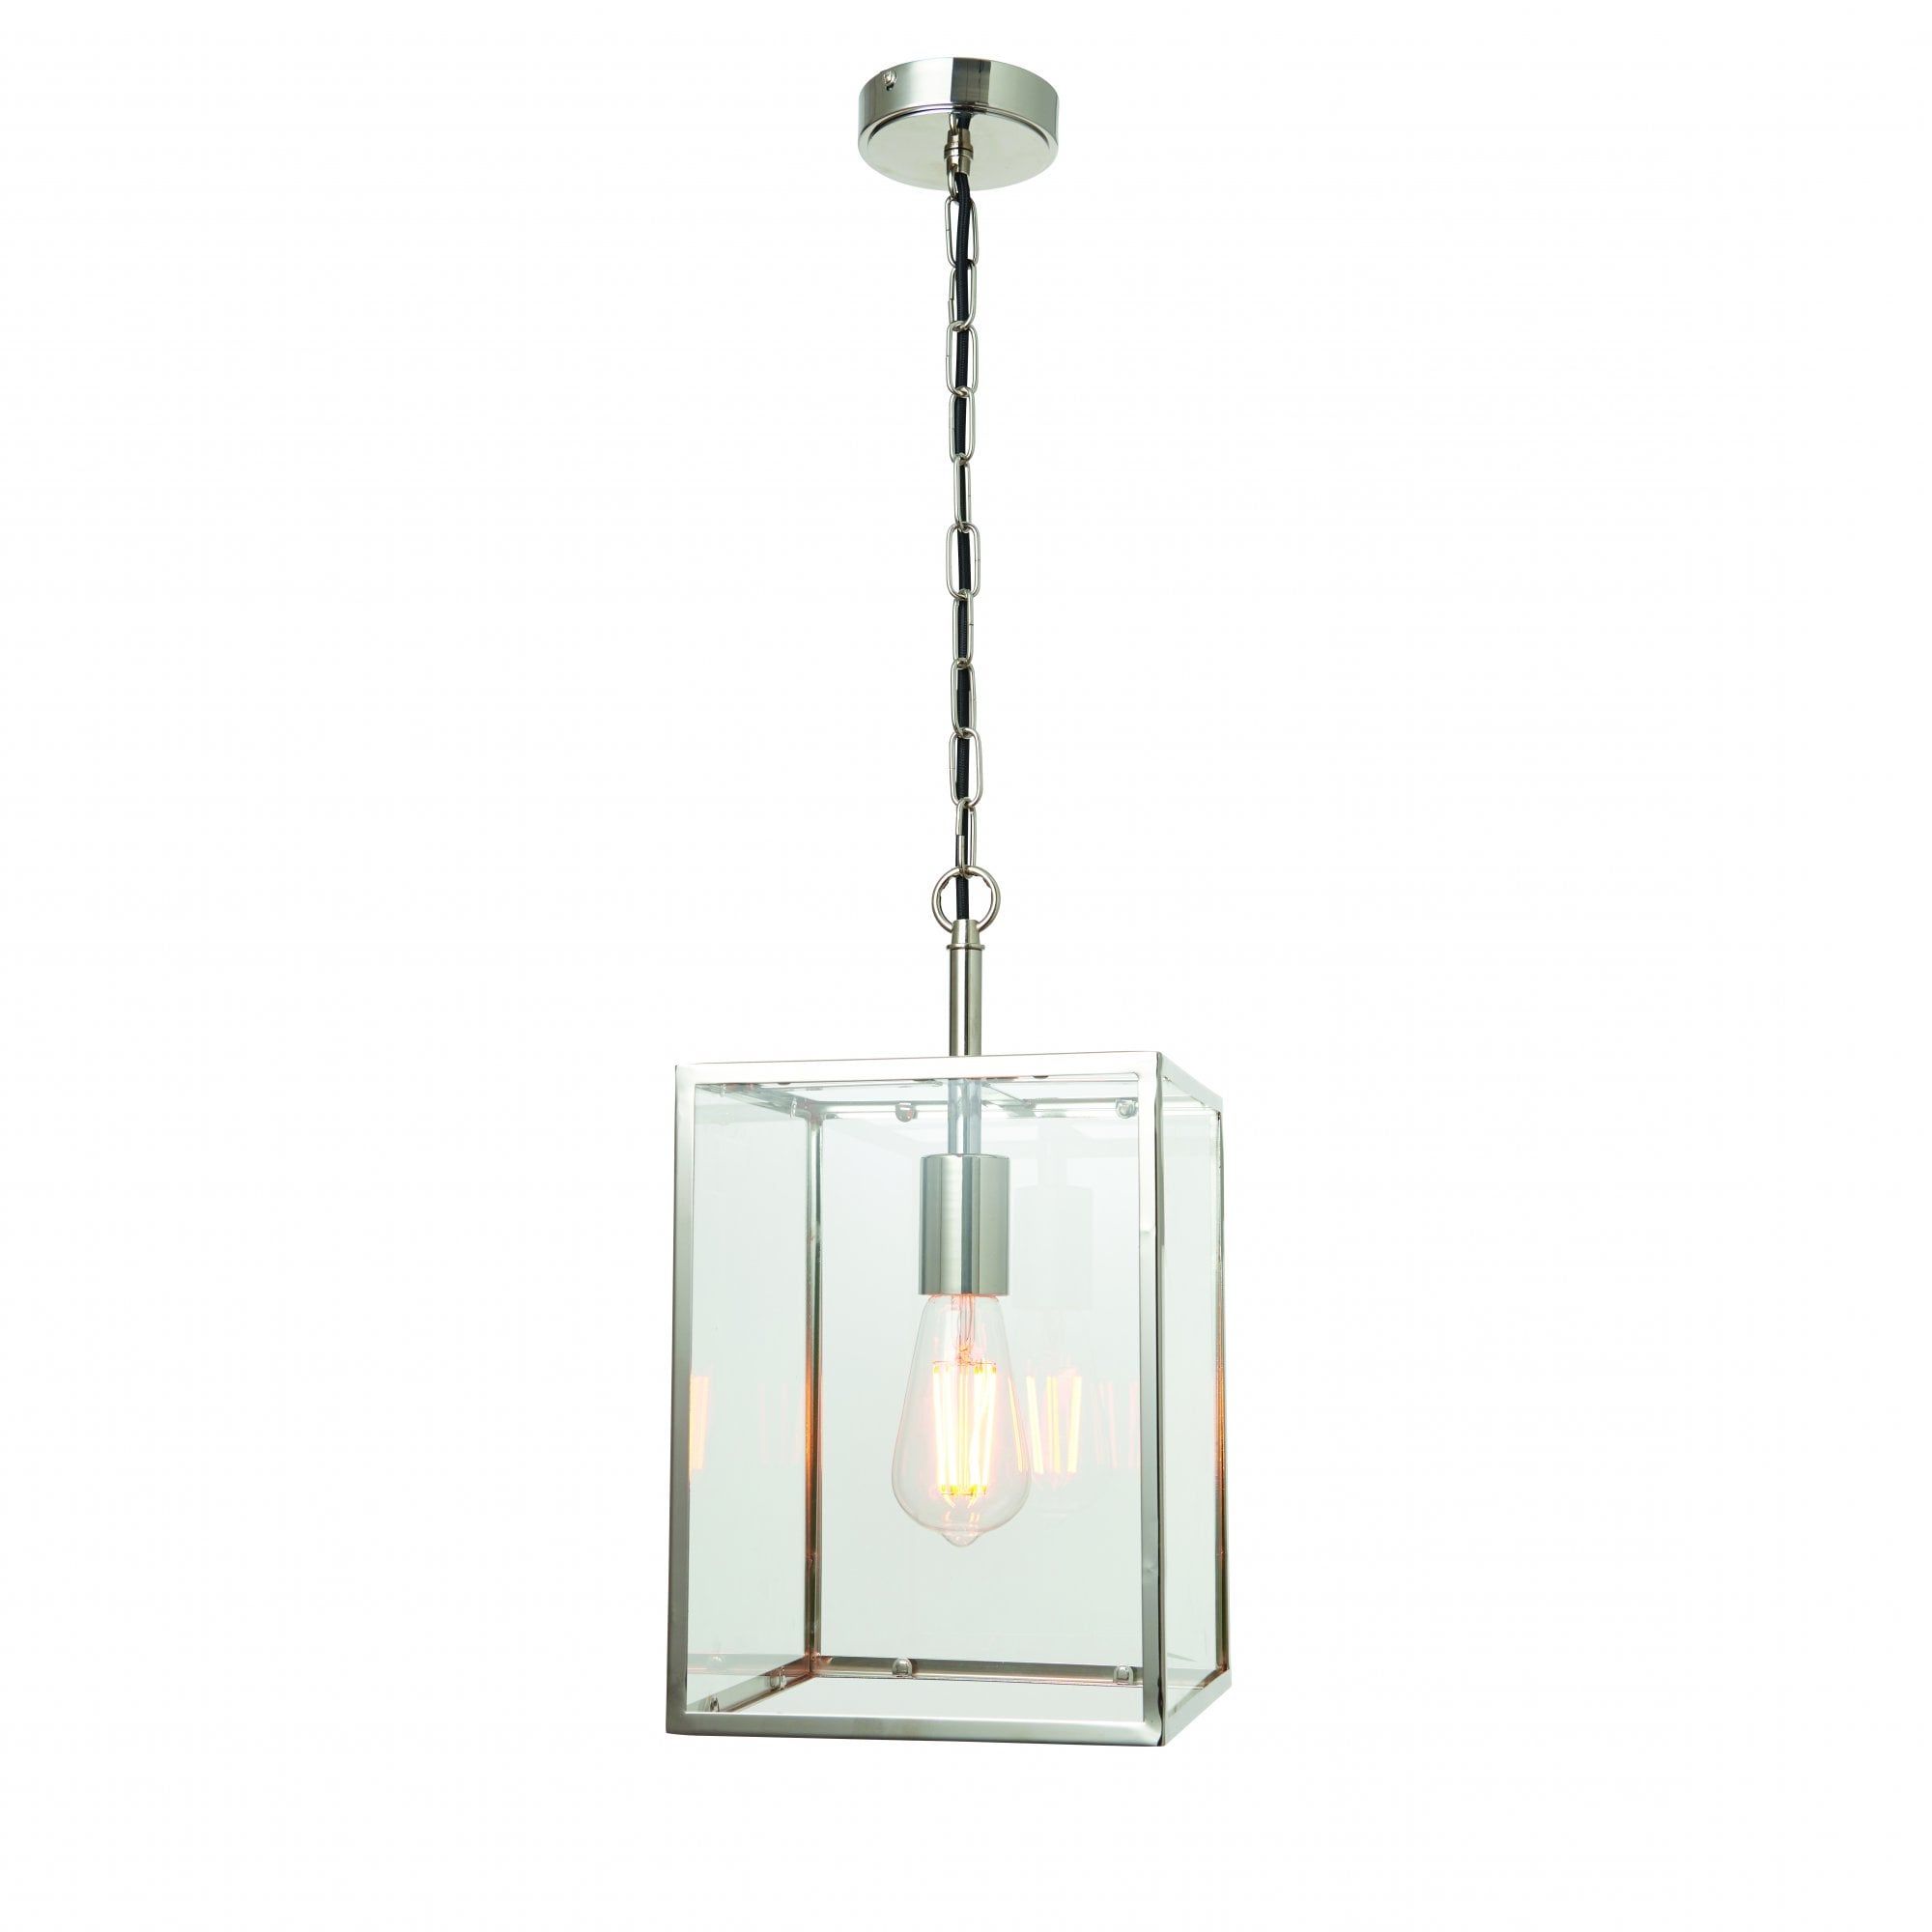 Widely Used Lantern Chandeliers With Clear Glass Throughout Pendant 40w Bright Nickel Plate & Clear Glass (View 1 of 15)